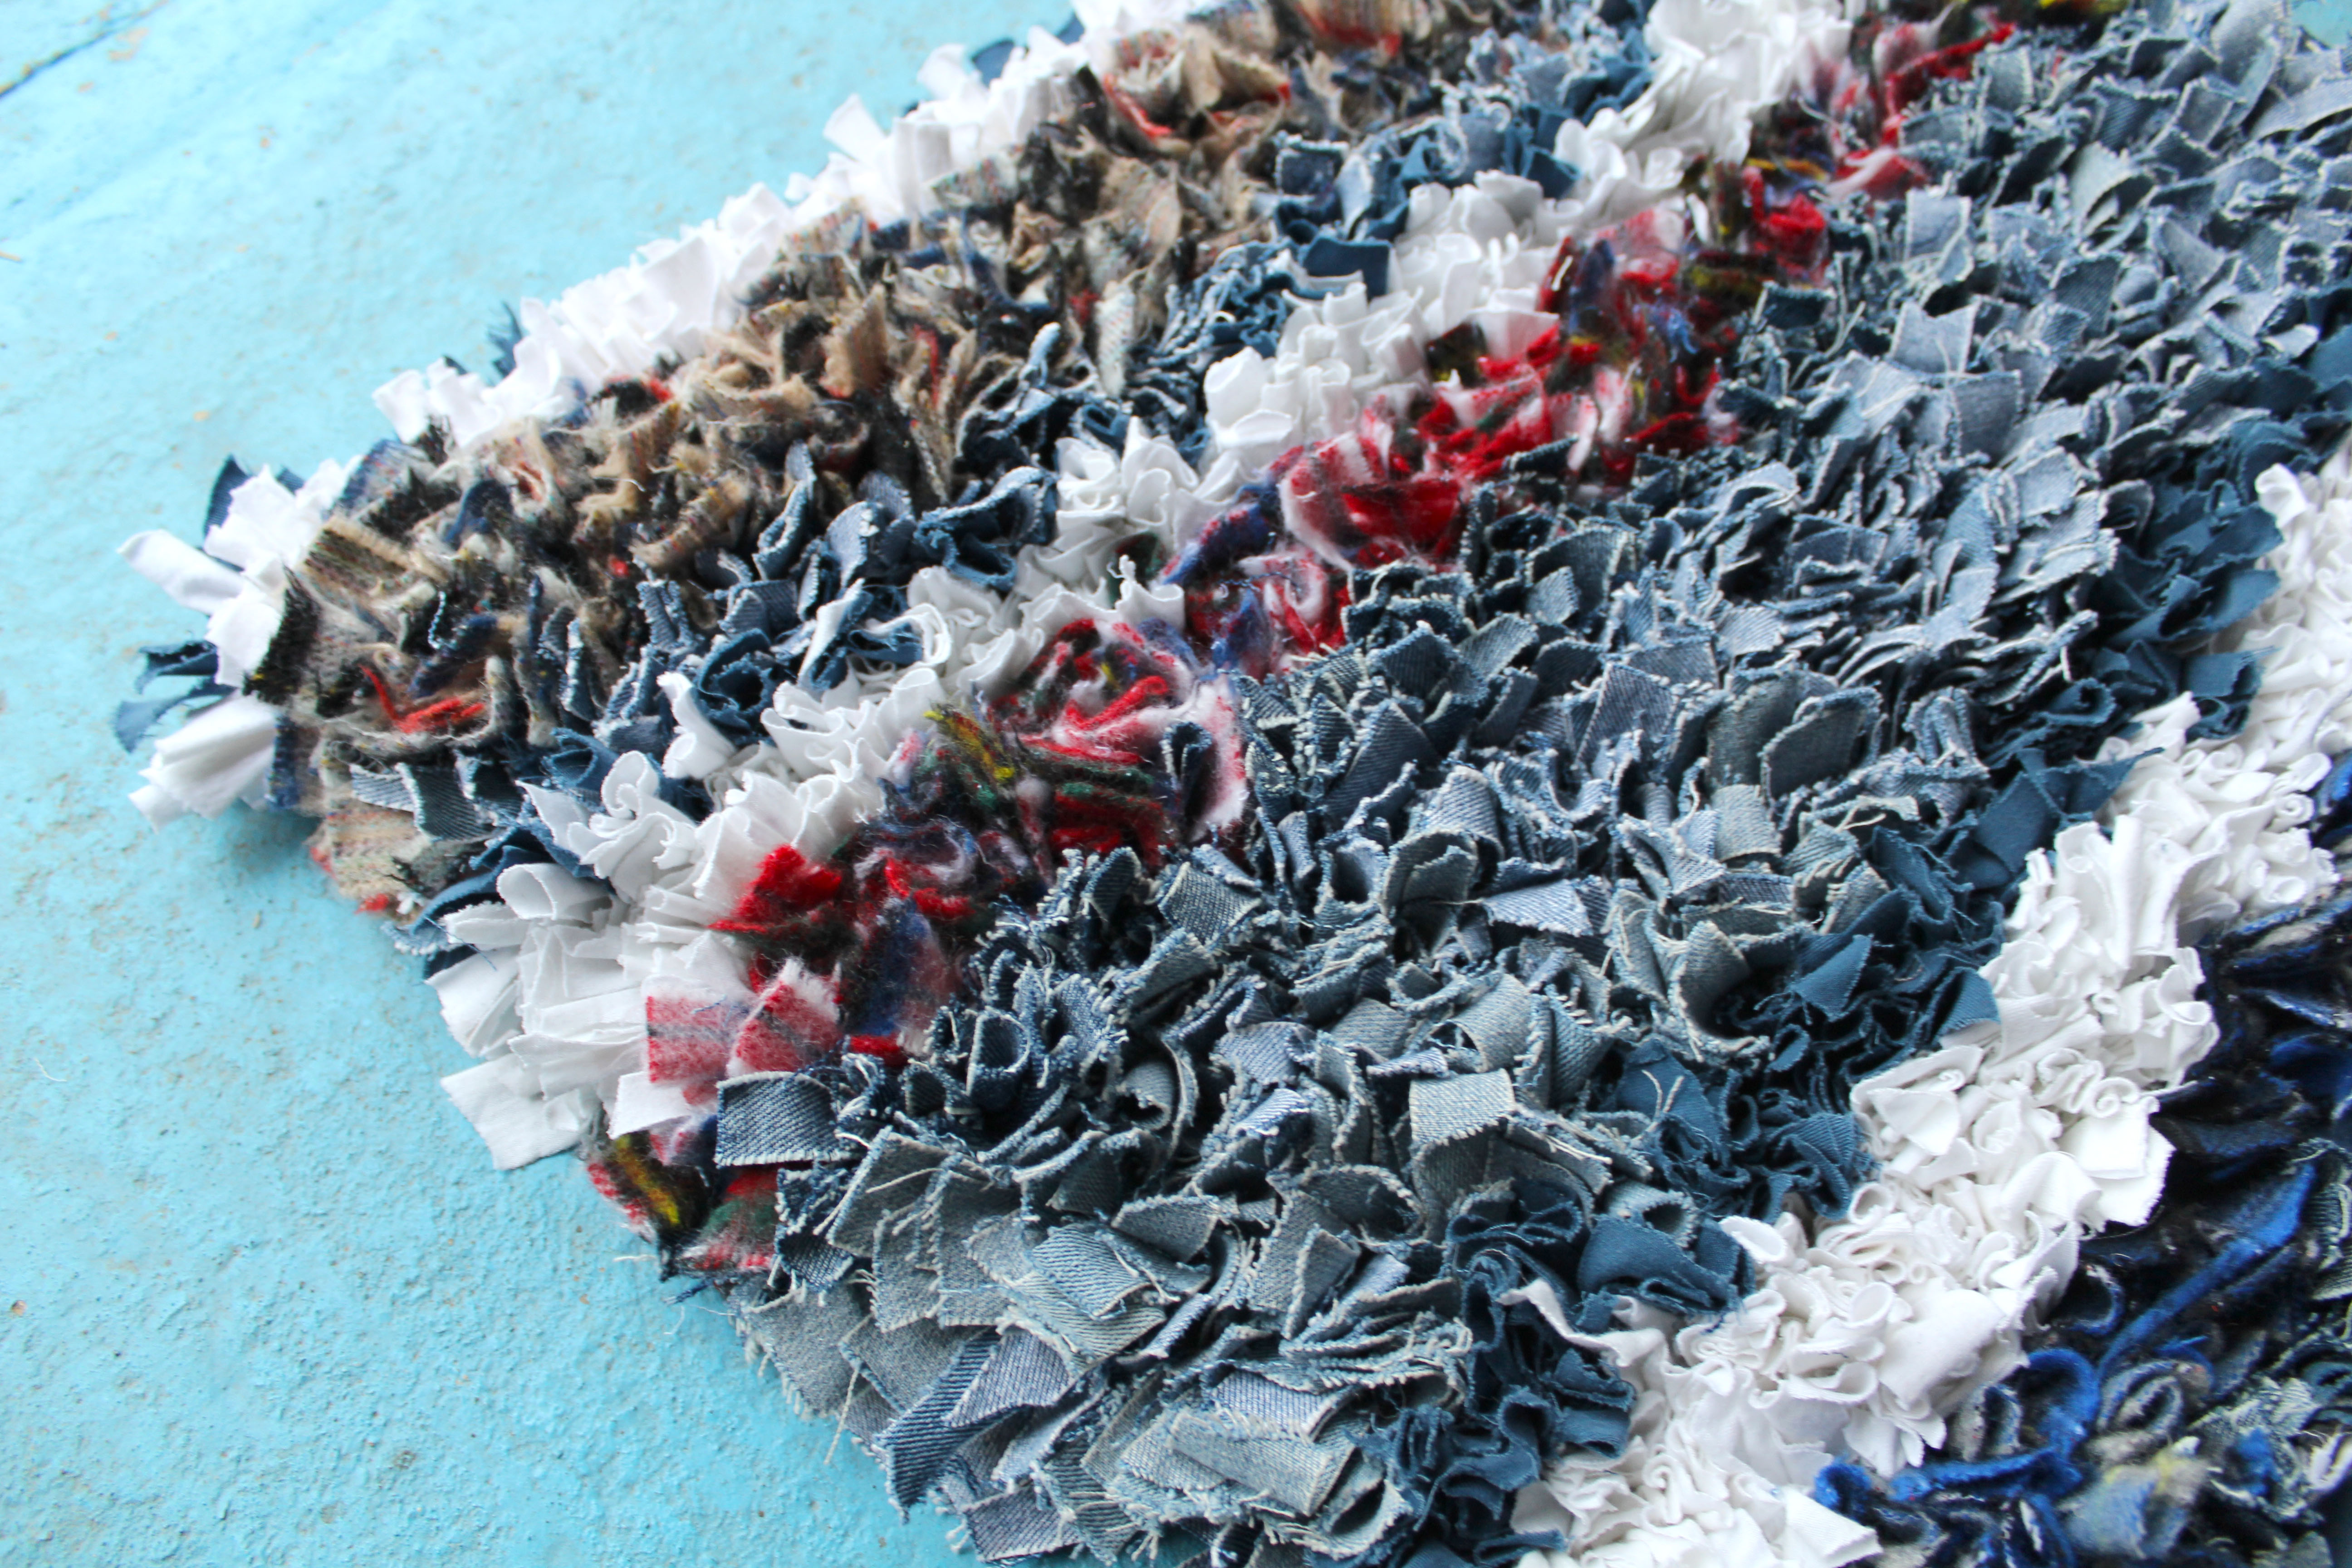 Denim, tartan and white rag rug in stripes made of old jeans